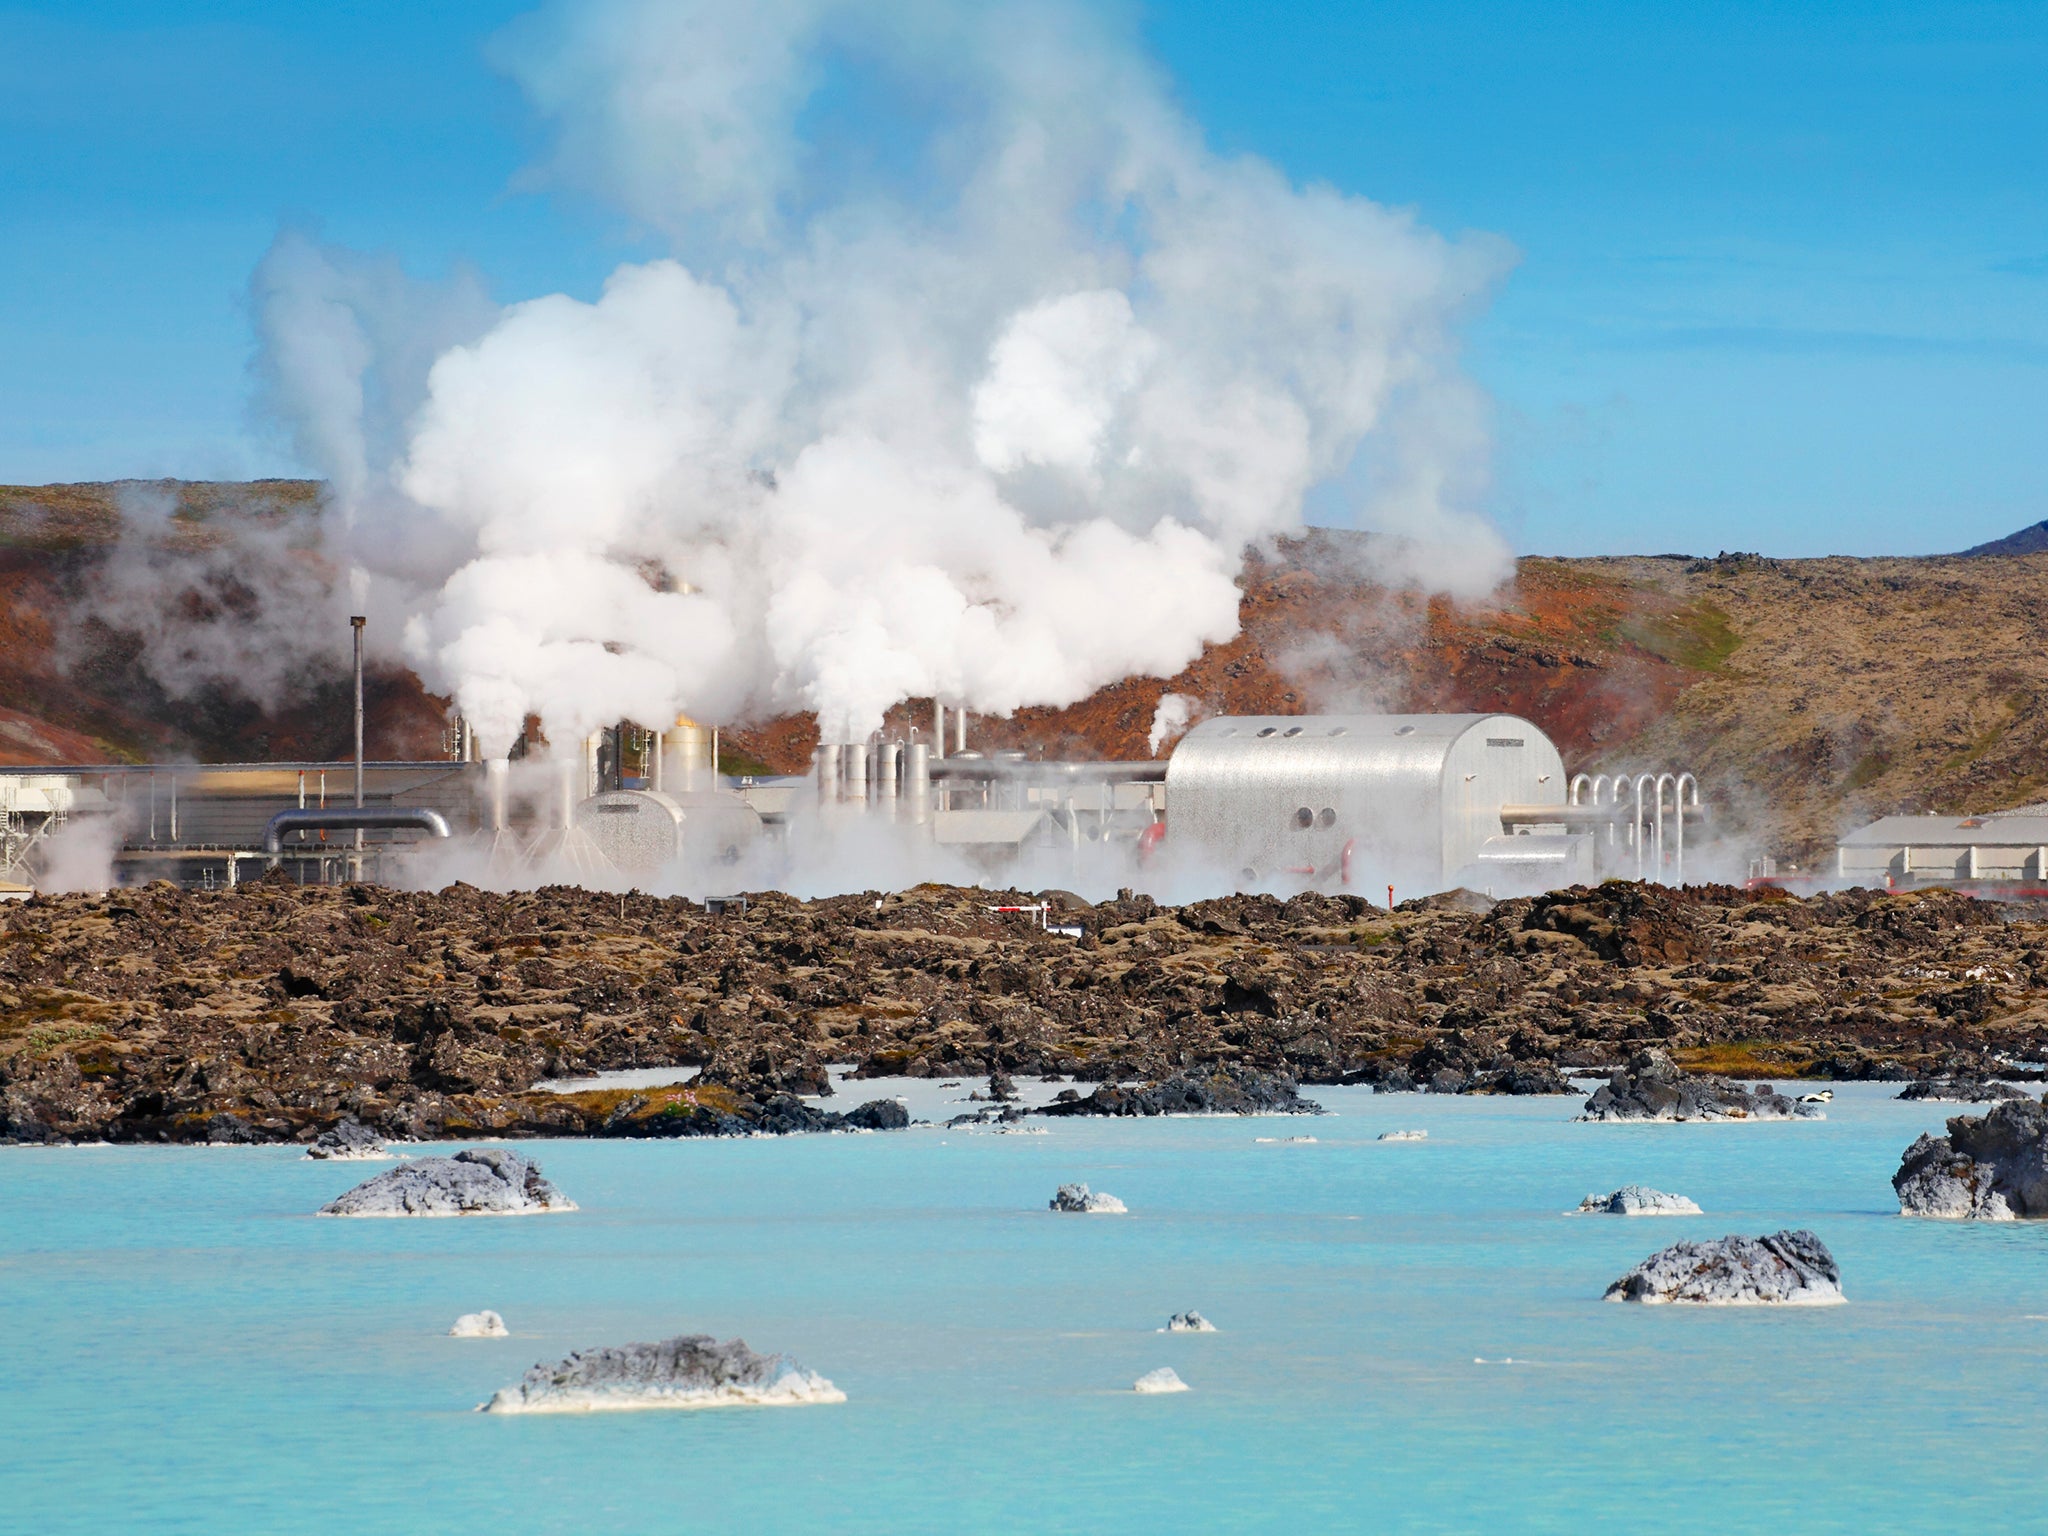 Hot topic: the geothermal power plant at Blue Lagoon, Iceland offers an example of how Britain could ease its energy crisis